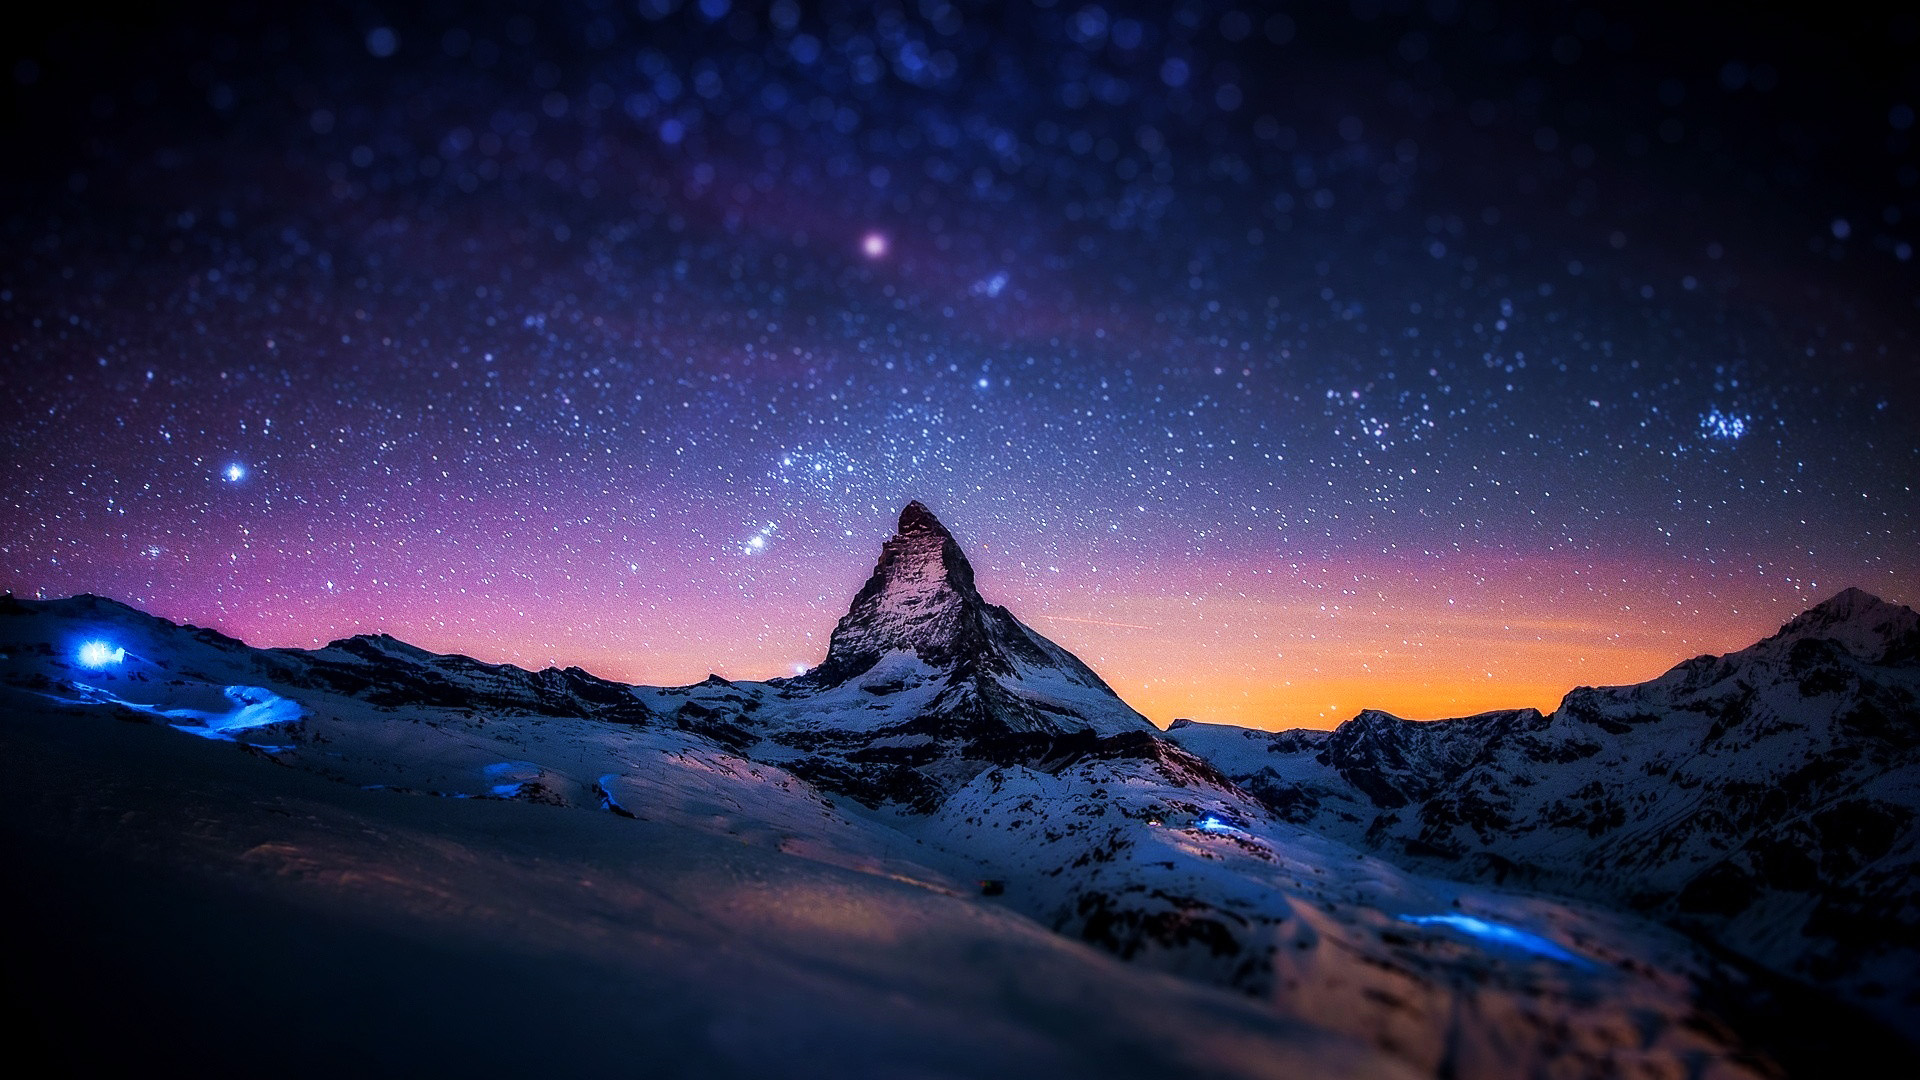 Mountain At Night Wallpaper 1920X1080 World Wallpaper Collection